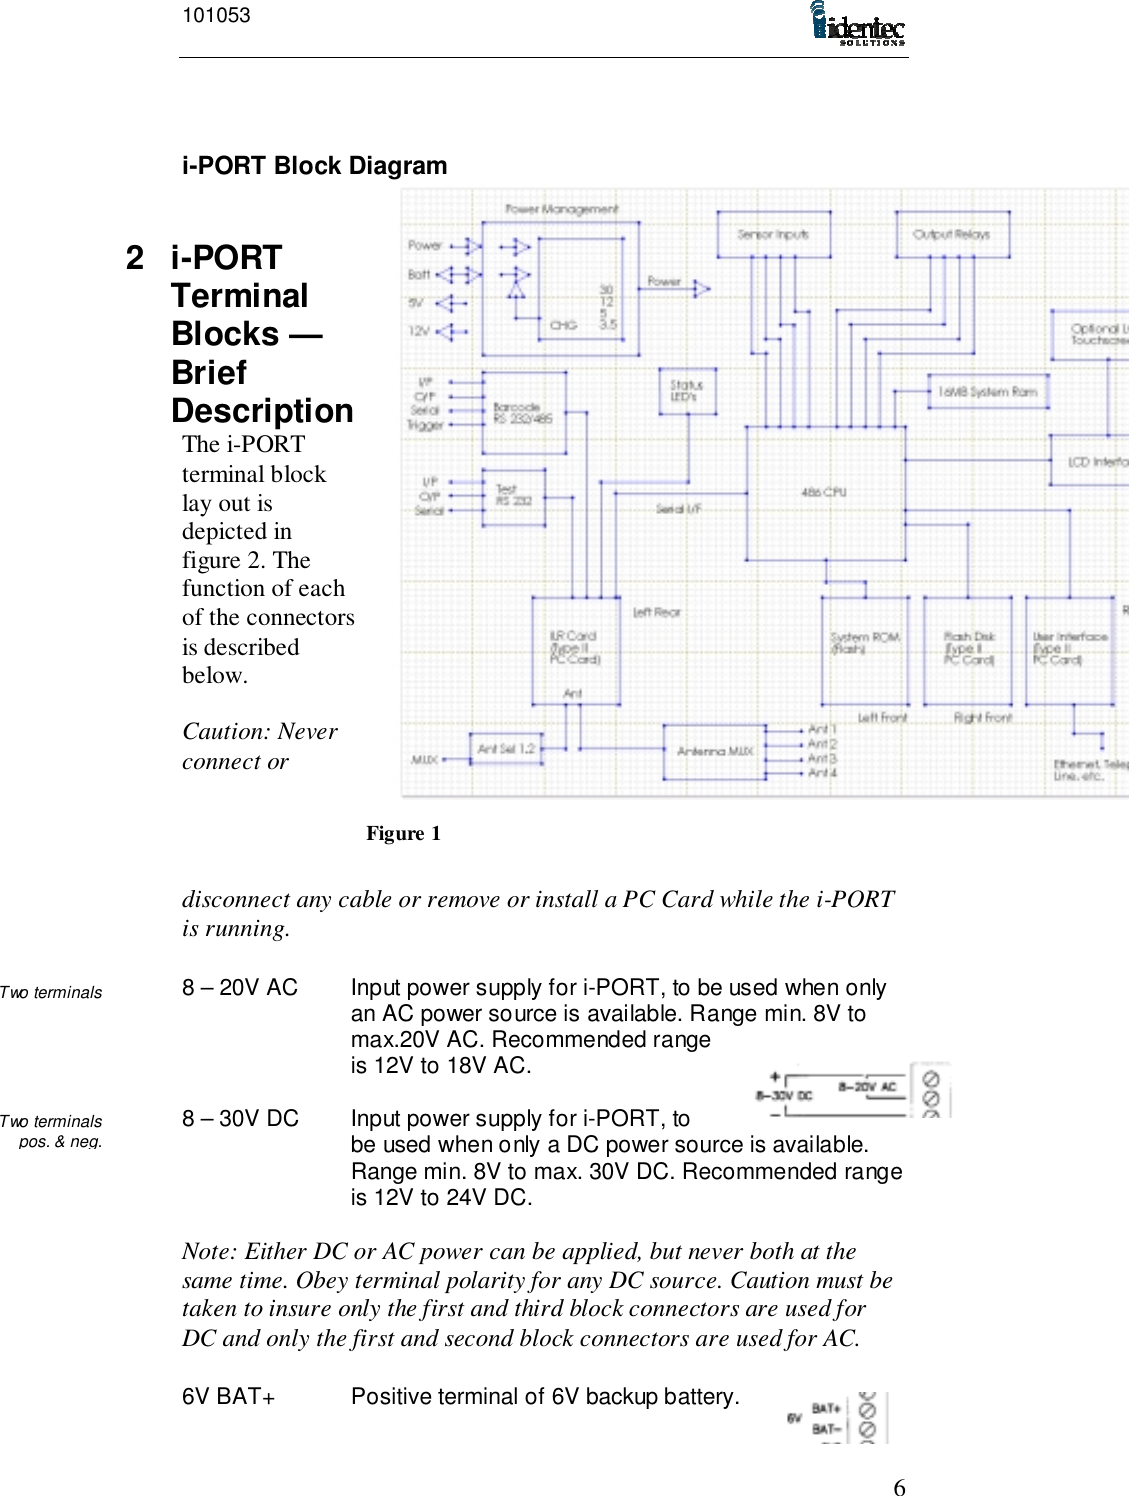 1010536Two terminalspos. &amp; neg.Two terminalsi-PORT Block Diagram2 i-PORTTerminalBlocks —BriefDescriptionThe i-PORTterminal blocklay out isdepicted infigure 2. Thefunction of eachof the connectorsis describedbelow.Caution: Neverconnect ordisconnect any cable or remove or install a PC Card while the i-PORTis running.8 – 20V AC Input power supply for i-PORT, to be used when onlyan AC power source is available. Range min. 8V tomax.20V AC. Recommended rangeis 12V to 18V AC.8 – 30V DC Input power supply for i-PORT, tobe used when only a DC power source is available.Range min. 8V to max. 30V DC. Recommended rangeis 12V to 24V DC.Note: Either DC or AC power can be applied, but never both at thesame time. Obey terminal polarity for any DC source. Caution must betaken to insure only the first and third block connectors are used forDC and only the first and second block connectors are used for AC.6V BAT+ Positive terminal of 6V backup battery.Figure 1